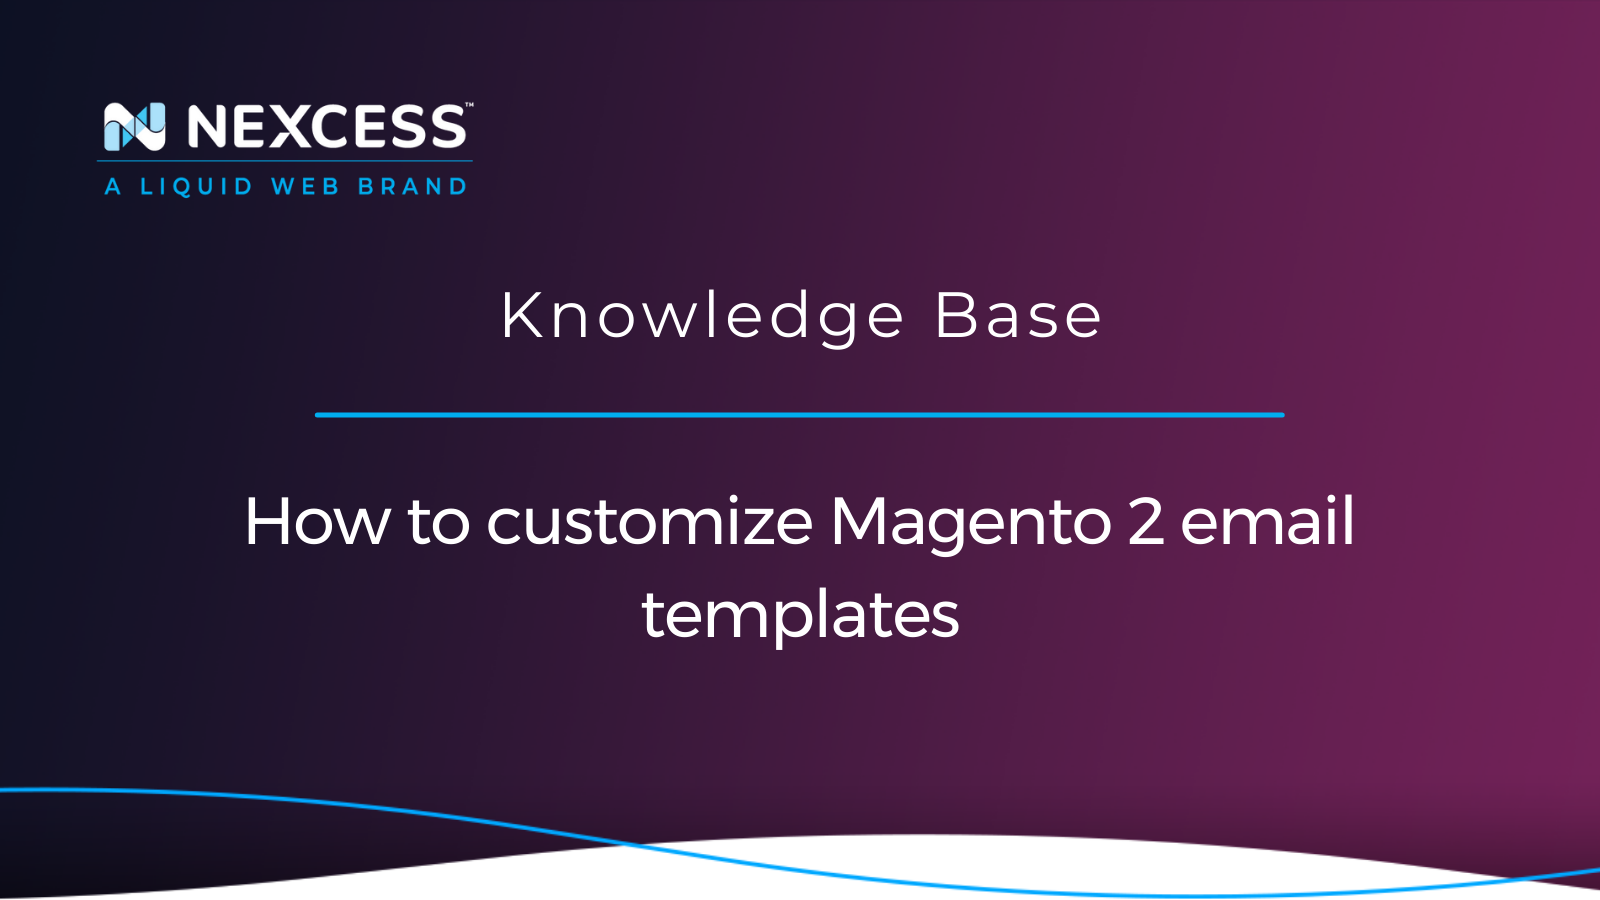 How to customize Magento 2 email templates